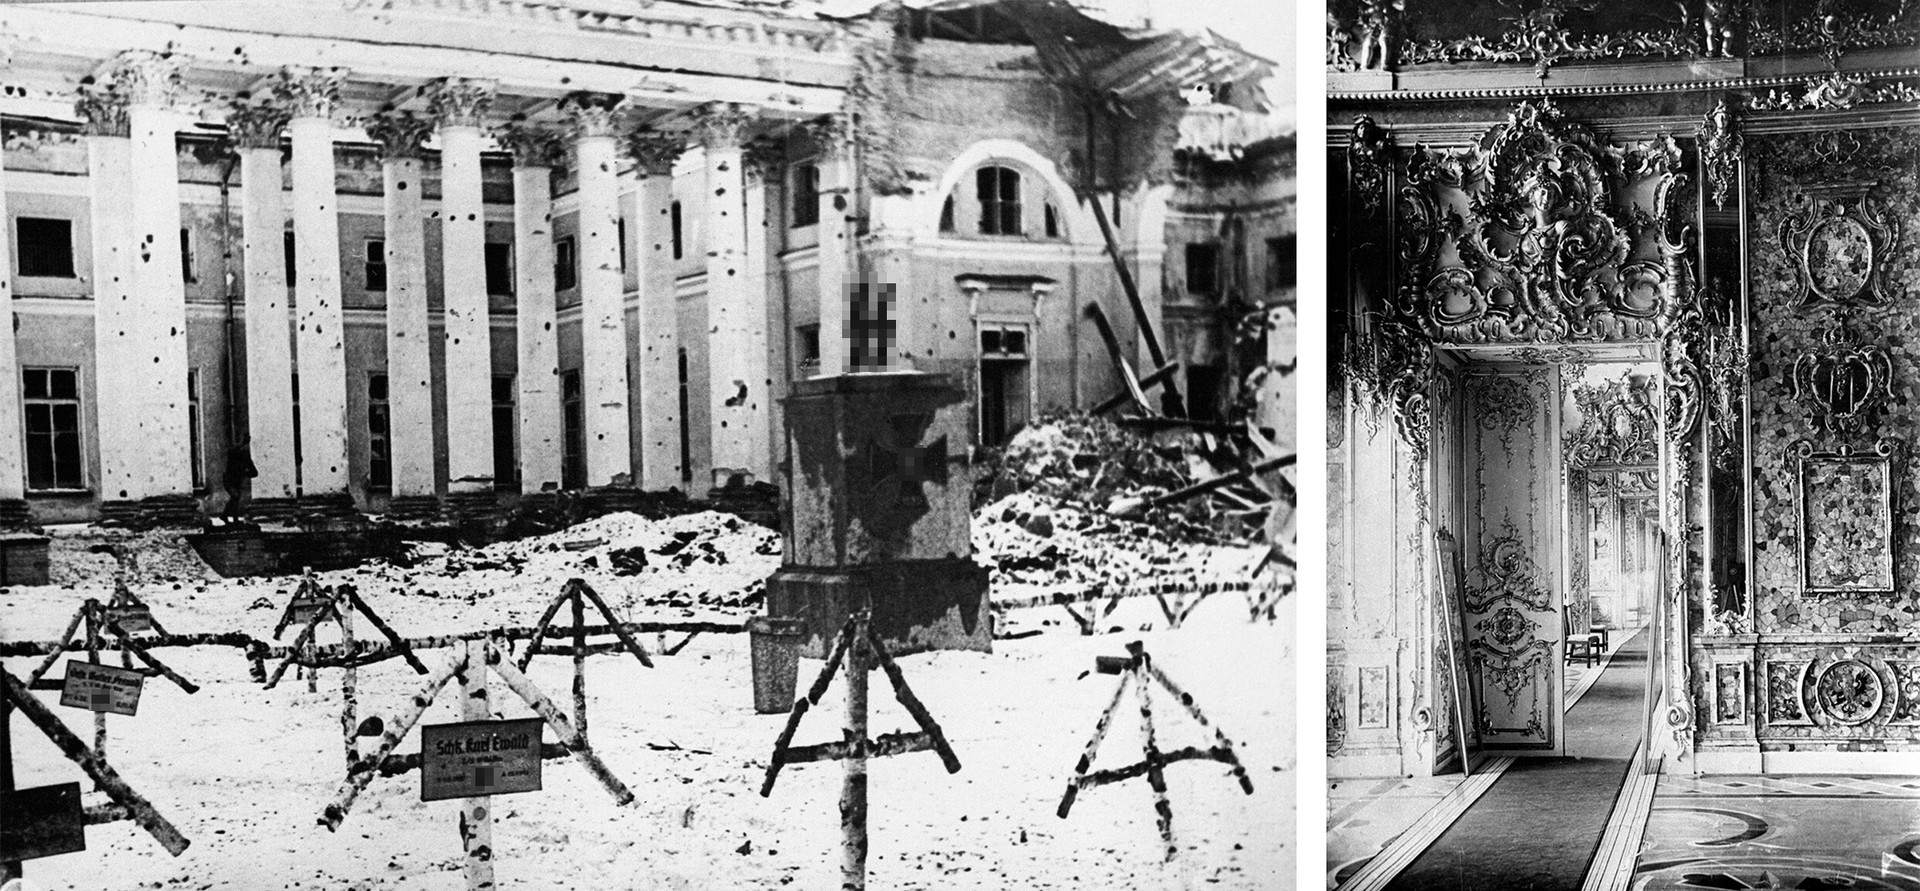 (L) The Alexander Palace in Tsarskoe Selo, near Leningrad (now St. Petersburg) after the liberation of the town by the Soviet troops; (R) The Amber Room of Catherine Palace before World War II